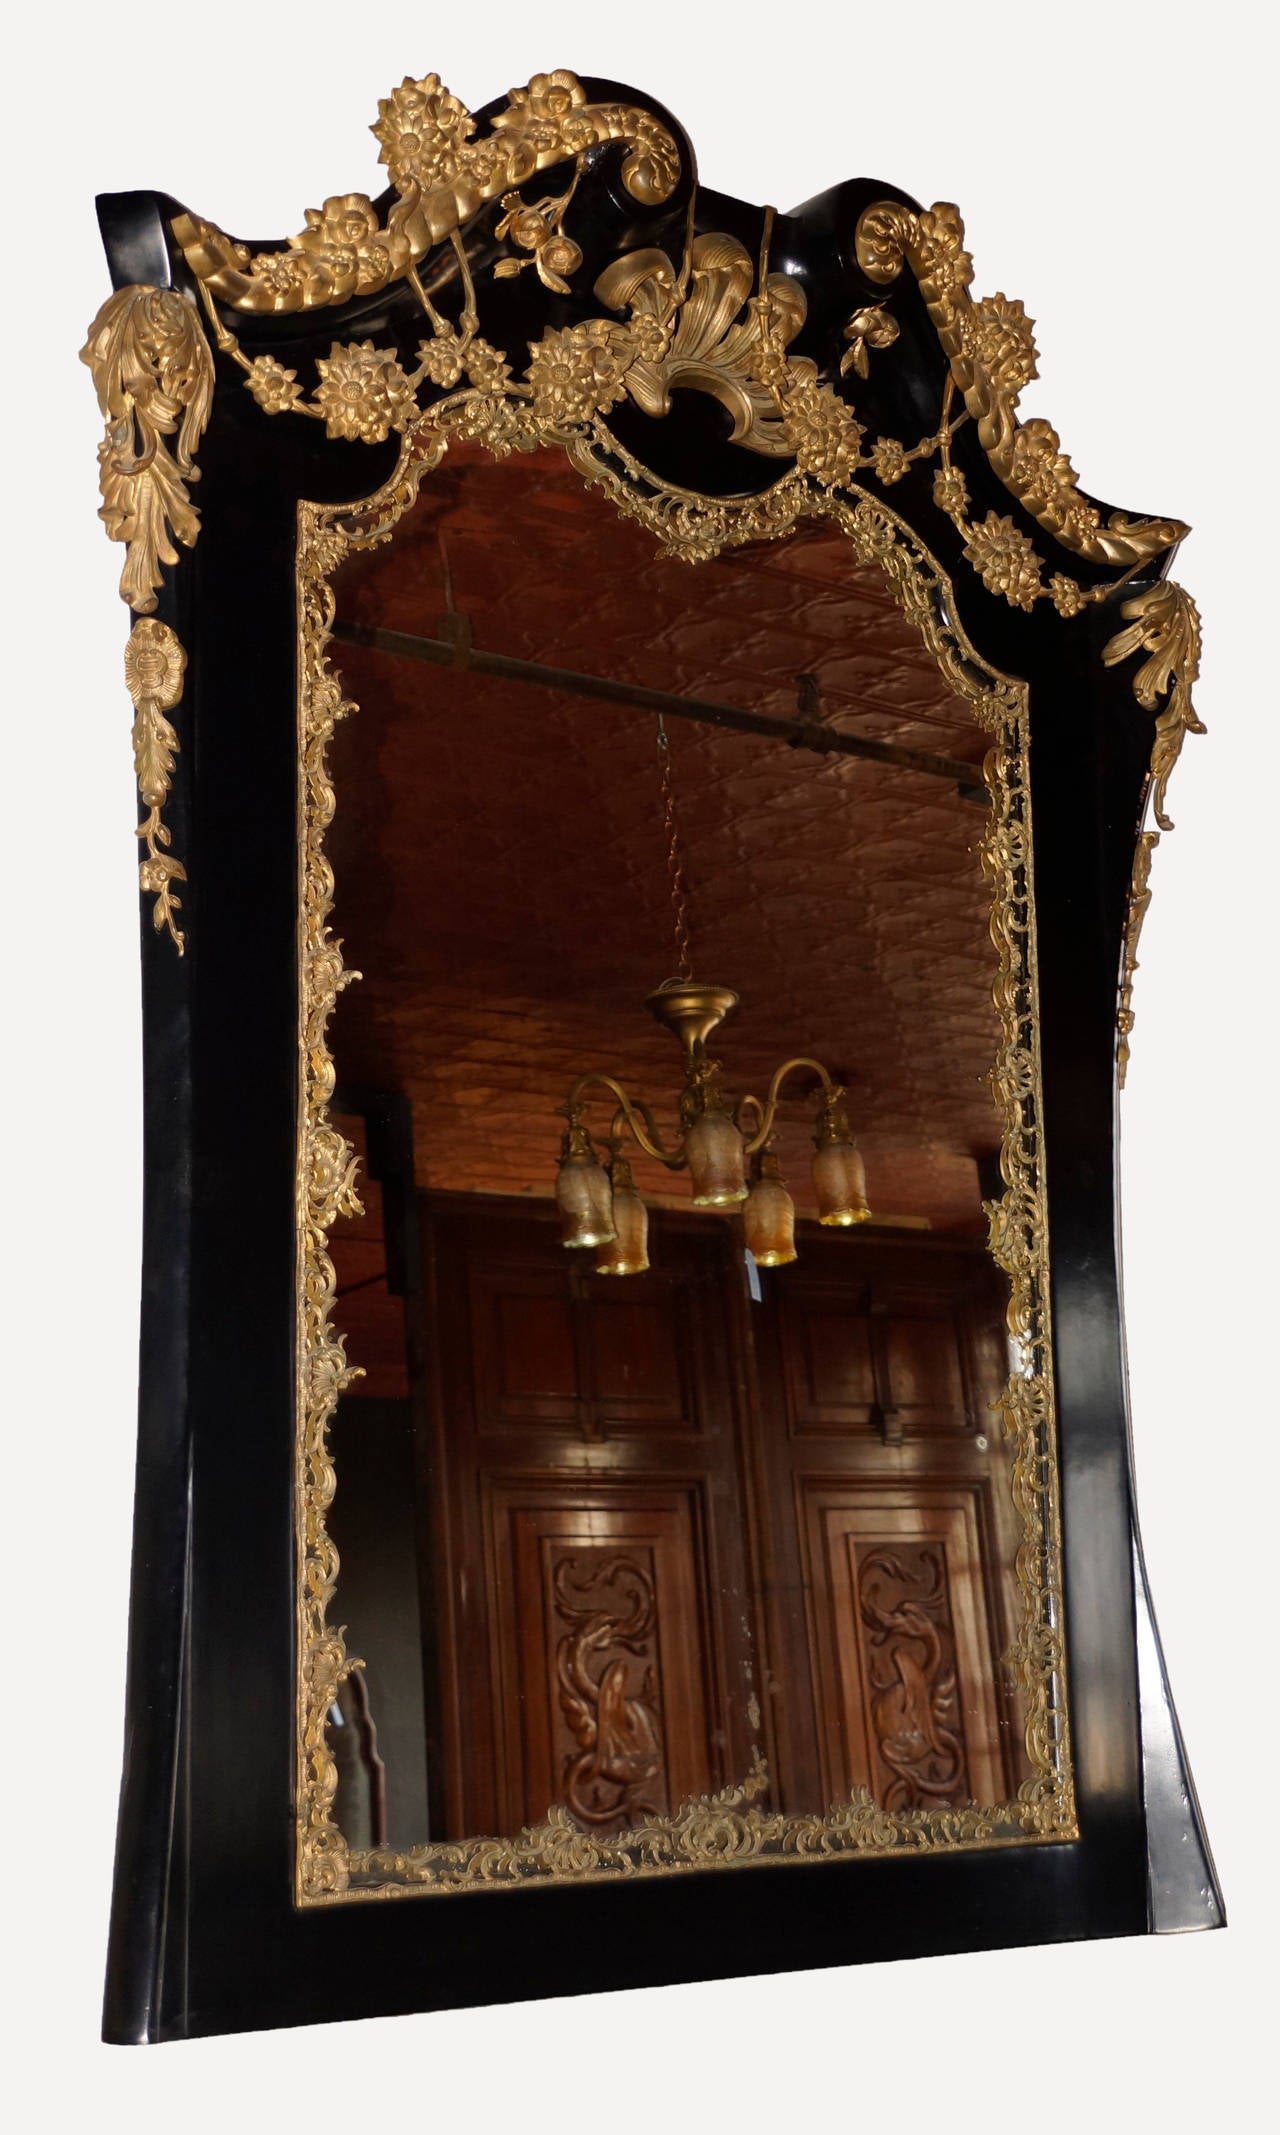 Elegant circa 1900 Georgian Revival style black lacquered overmantel mirror surmounted by swan neck pediment with ormolu mounts. Mirror plate has undulating top with pierced ormolu crest and is surrounded by finely detailed rocaille metalwork.